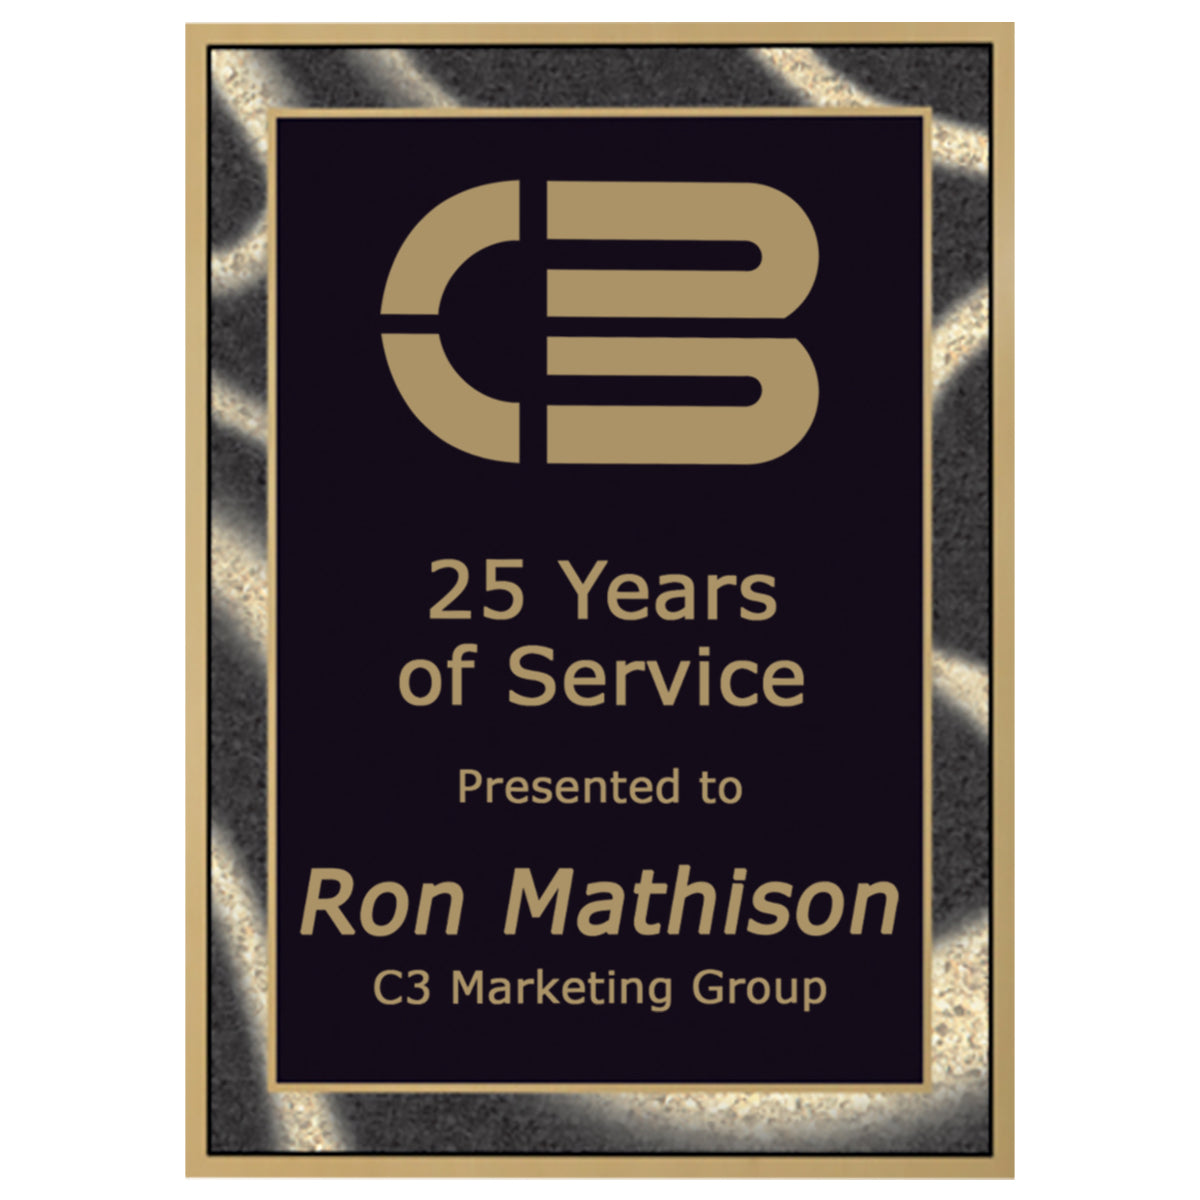 Brass Plated Steel Artist Plaque Plate, 5" x 7", Laser Engraved Plaque Plate Craftworks NW Black/Gold 